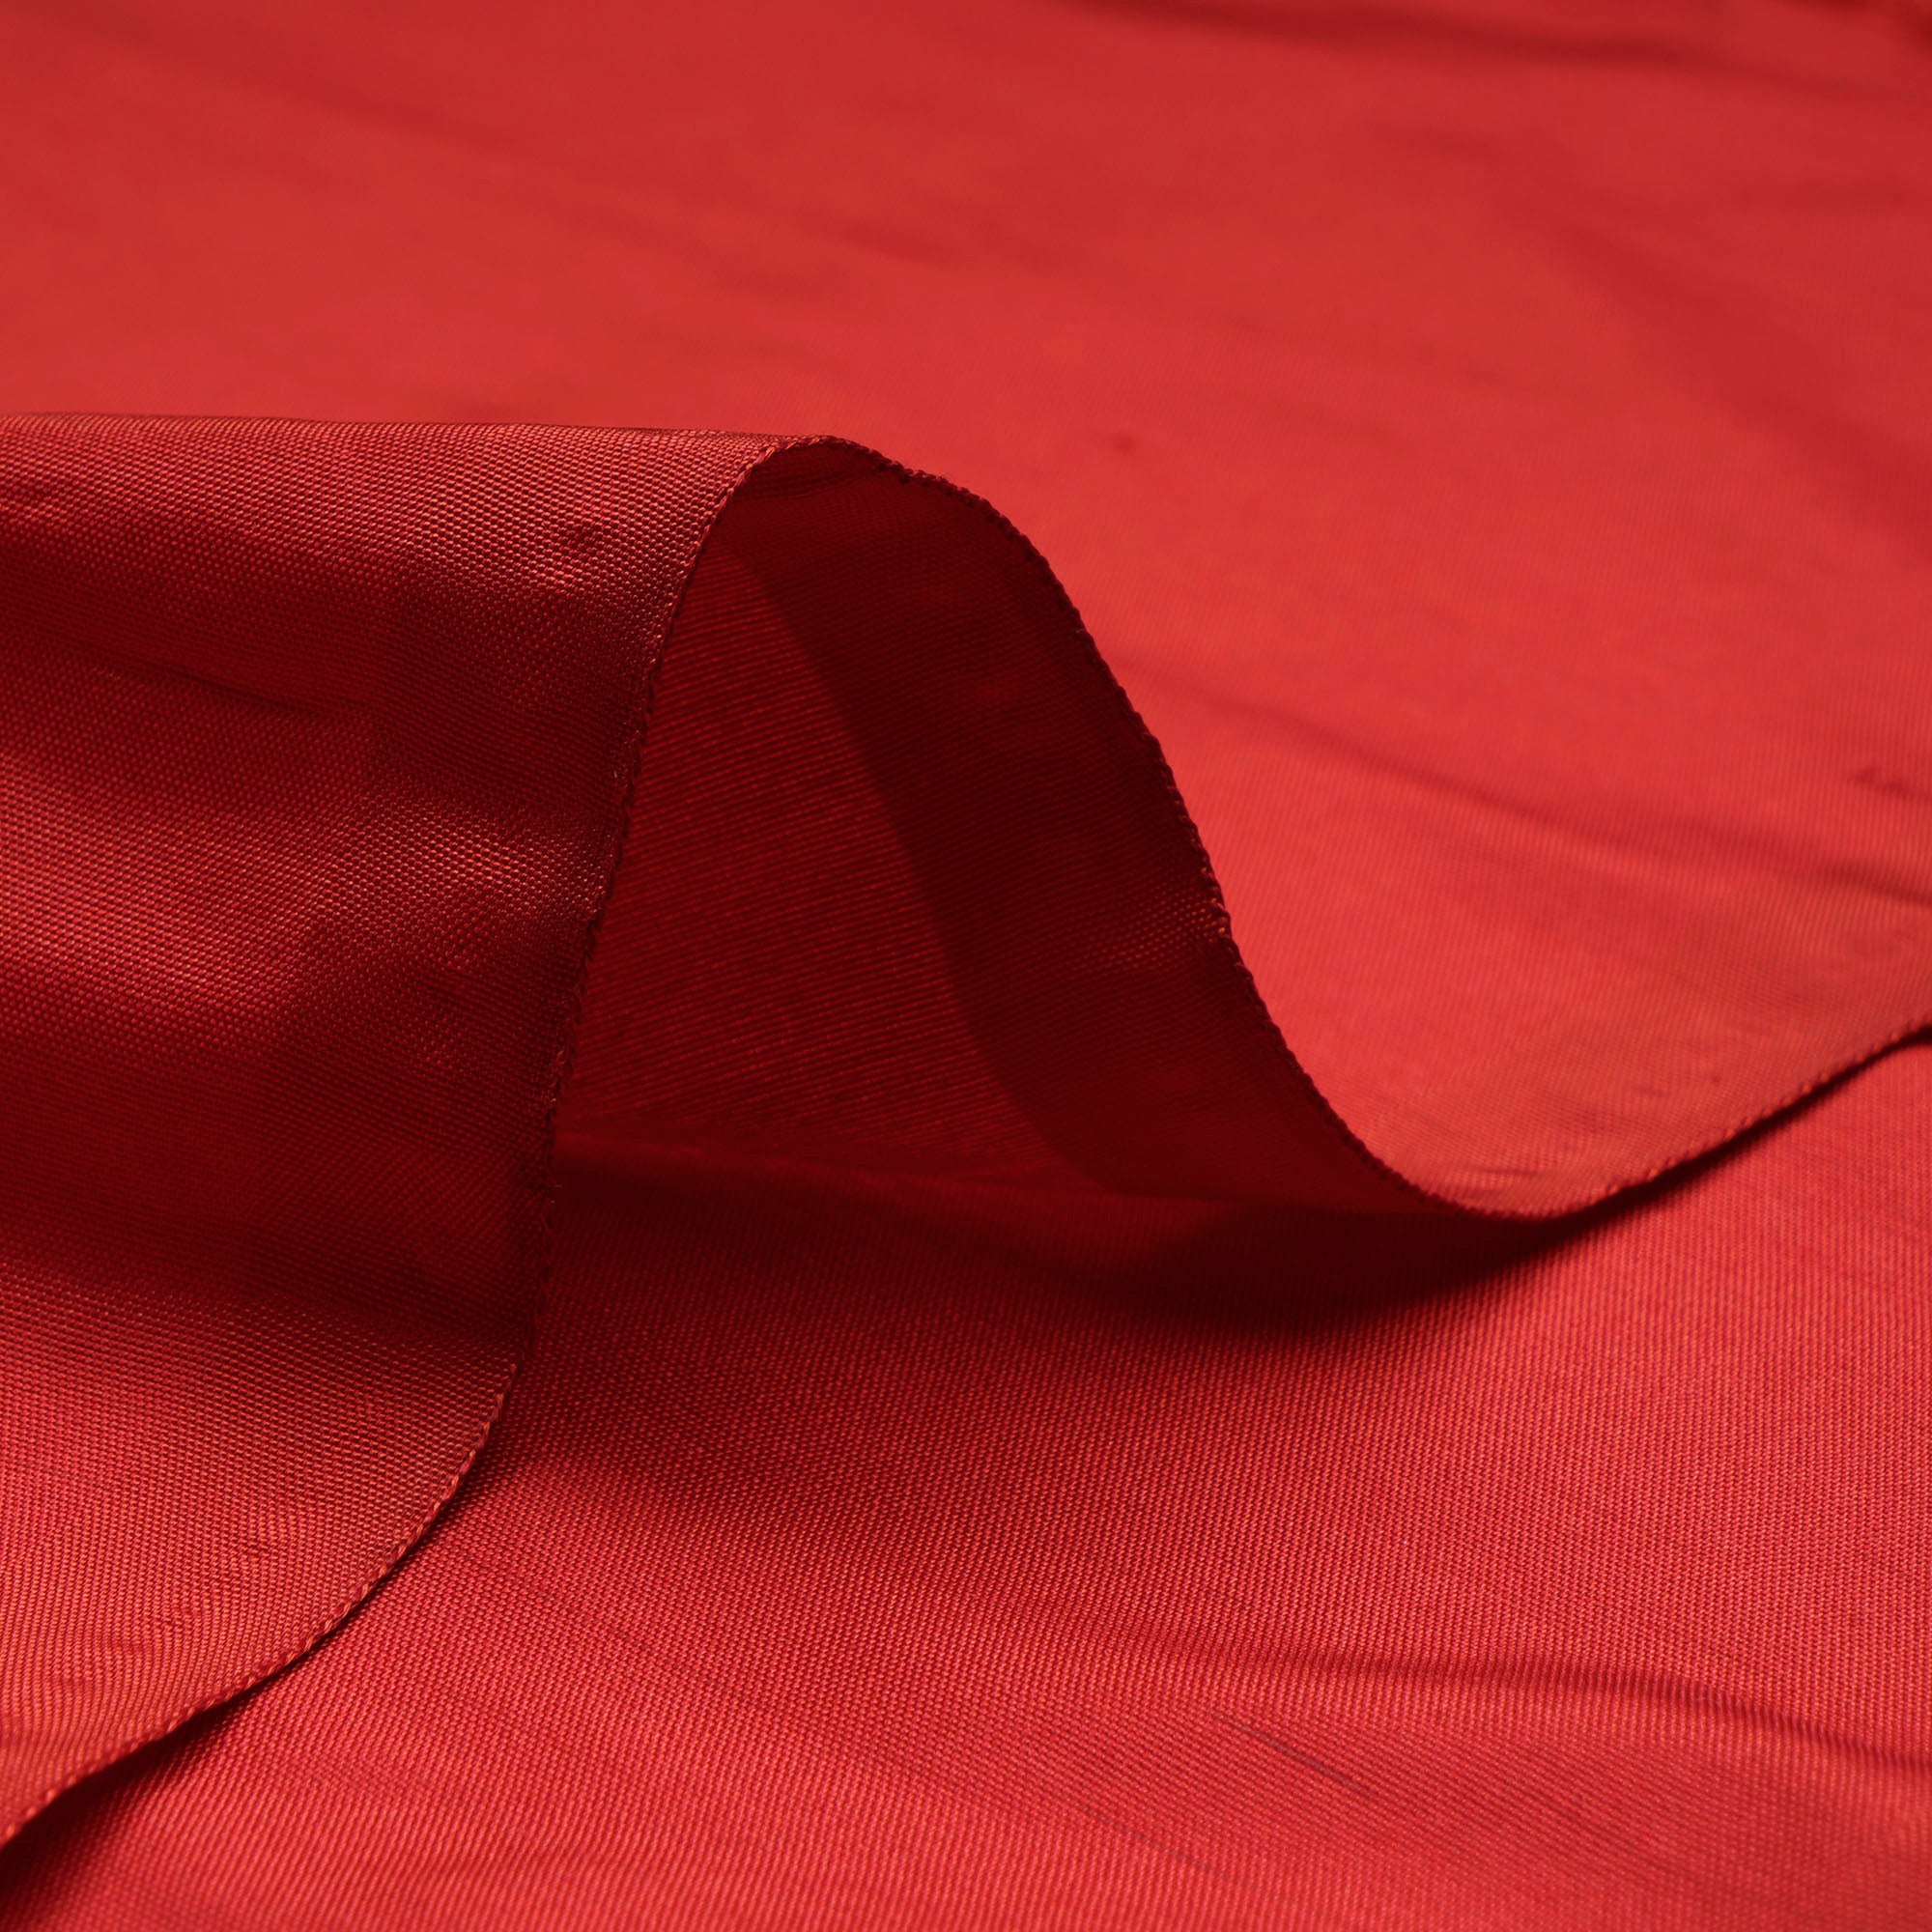 Red Color Dupion Silk Fabric